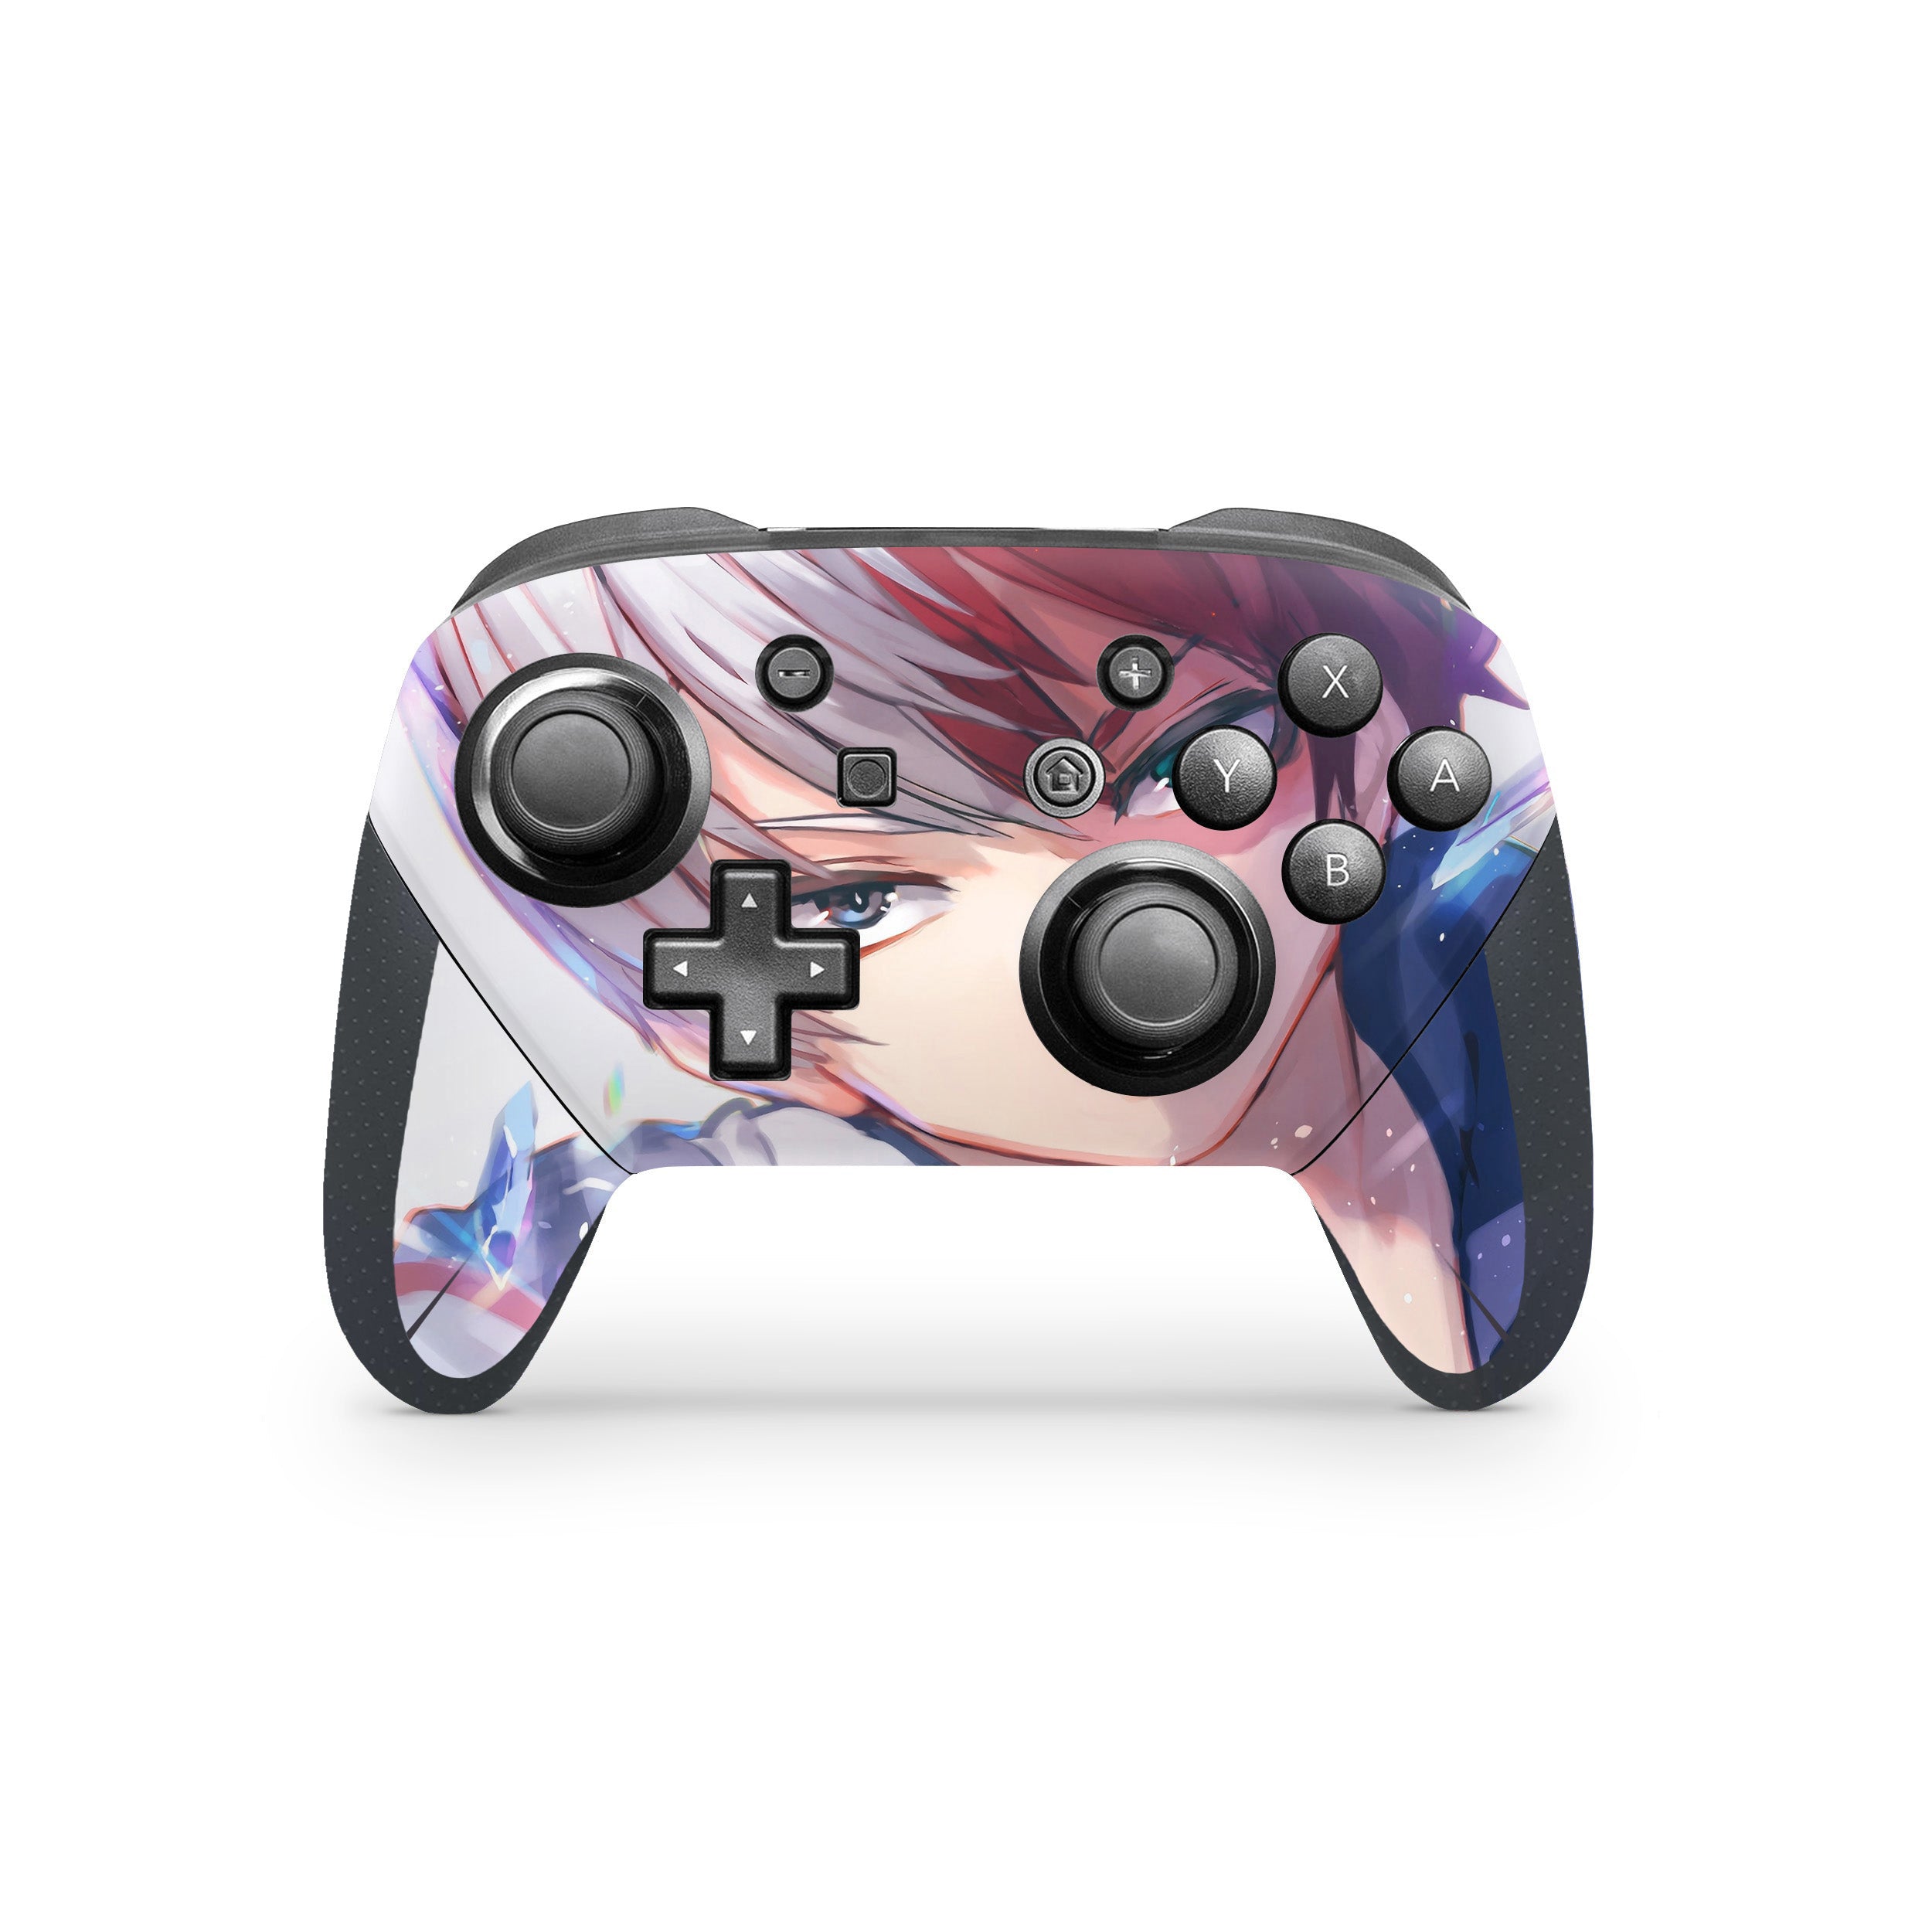 A video game skin featuring a My Hero Academia Shoto Todoroki design for the Switch Pro Controller.